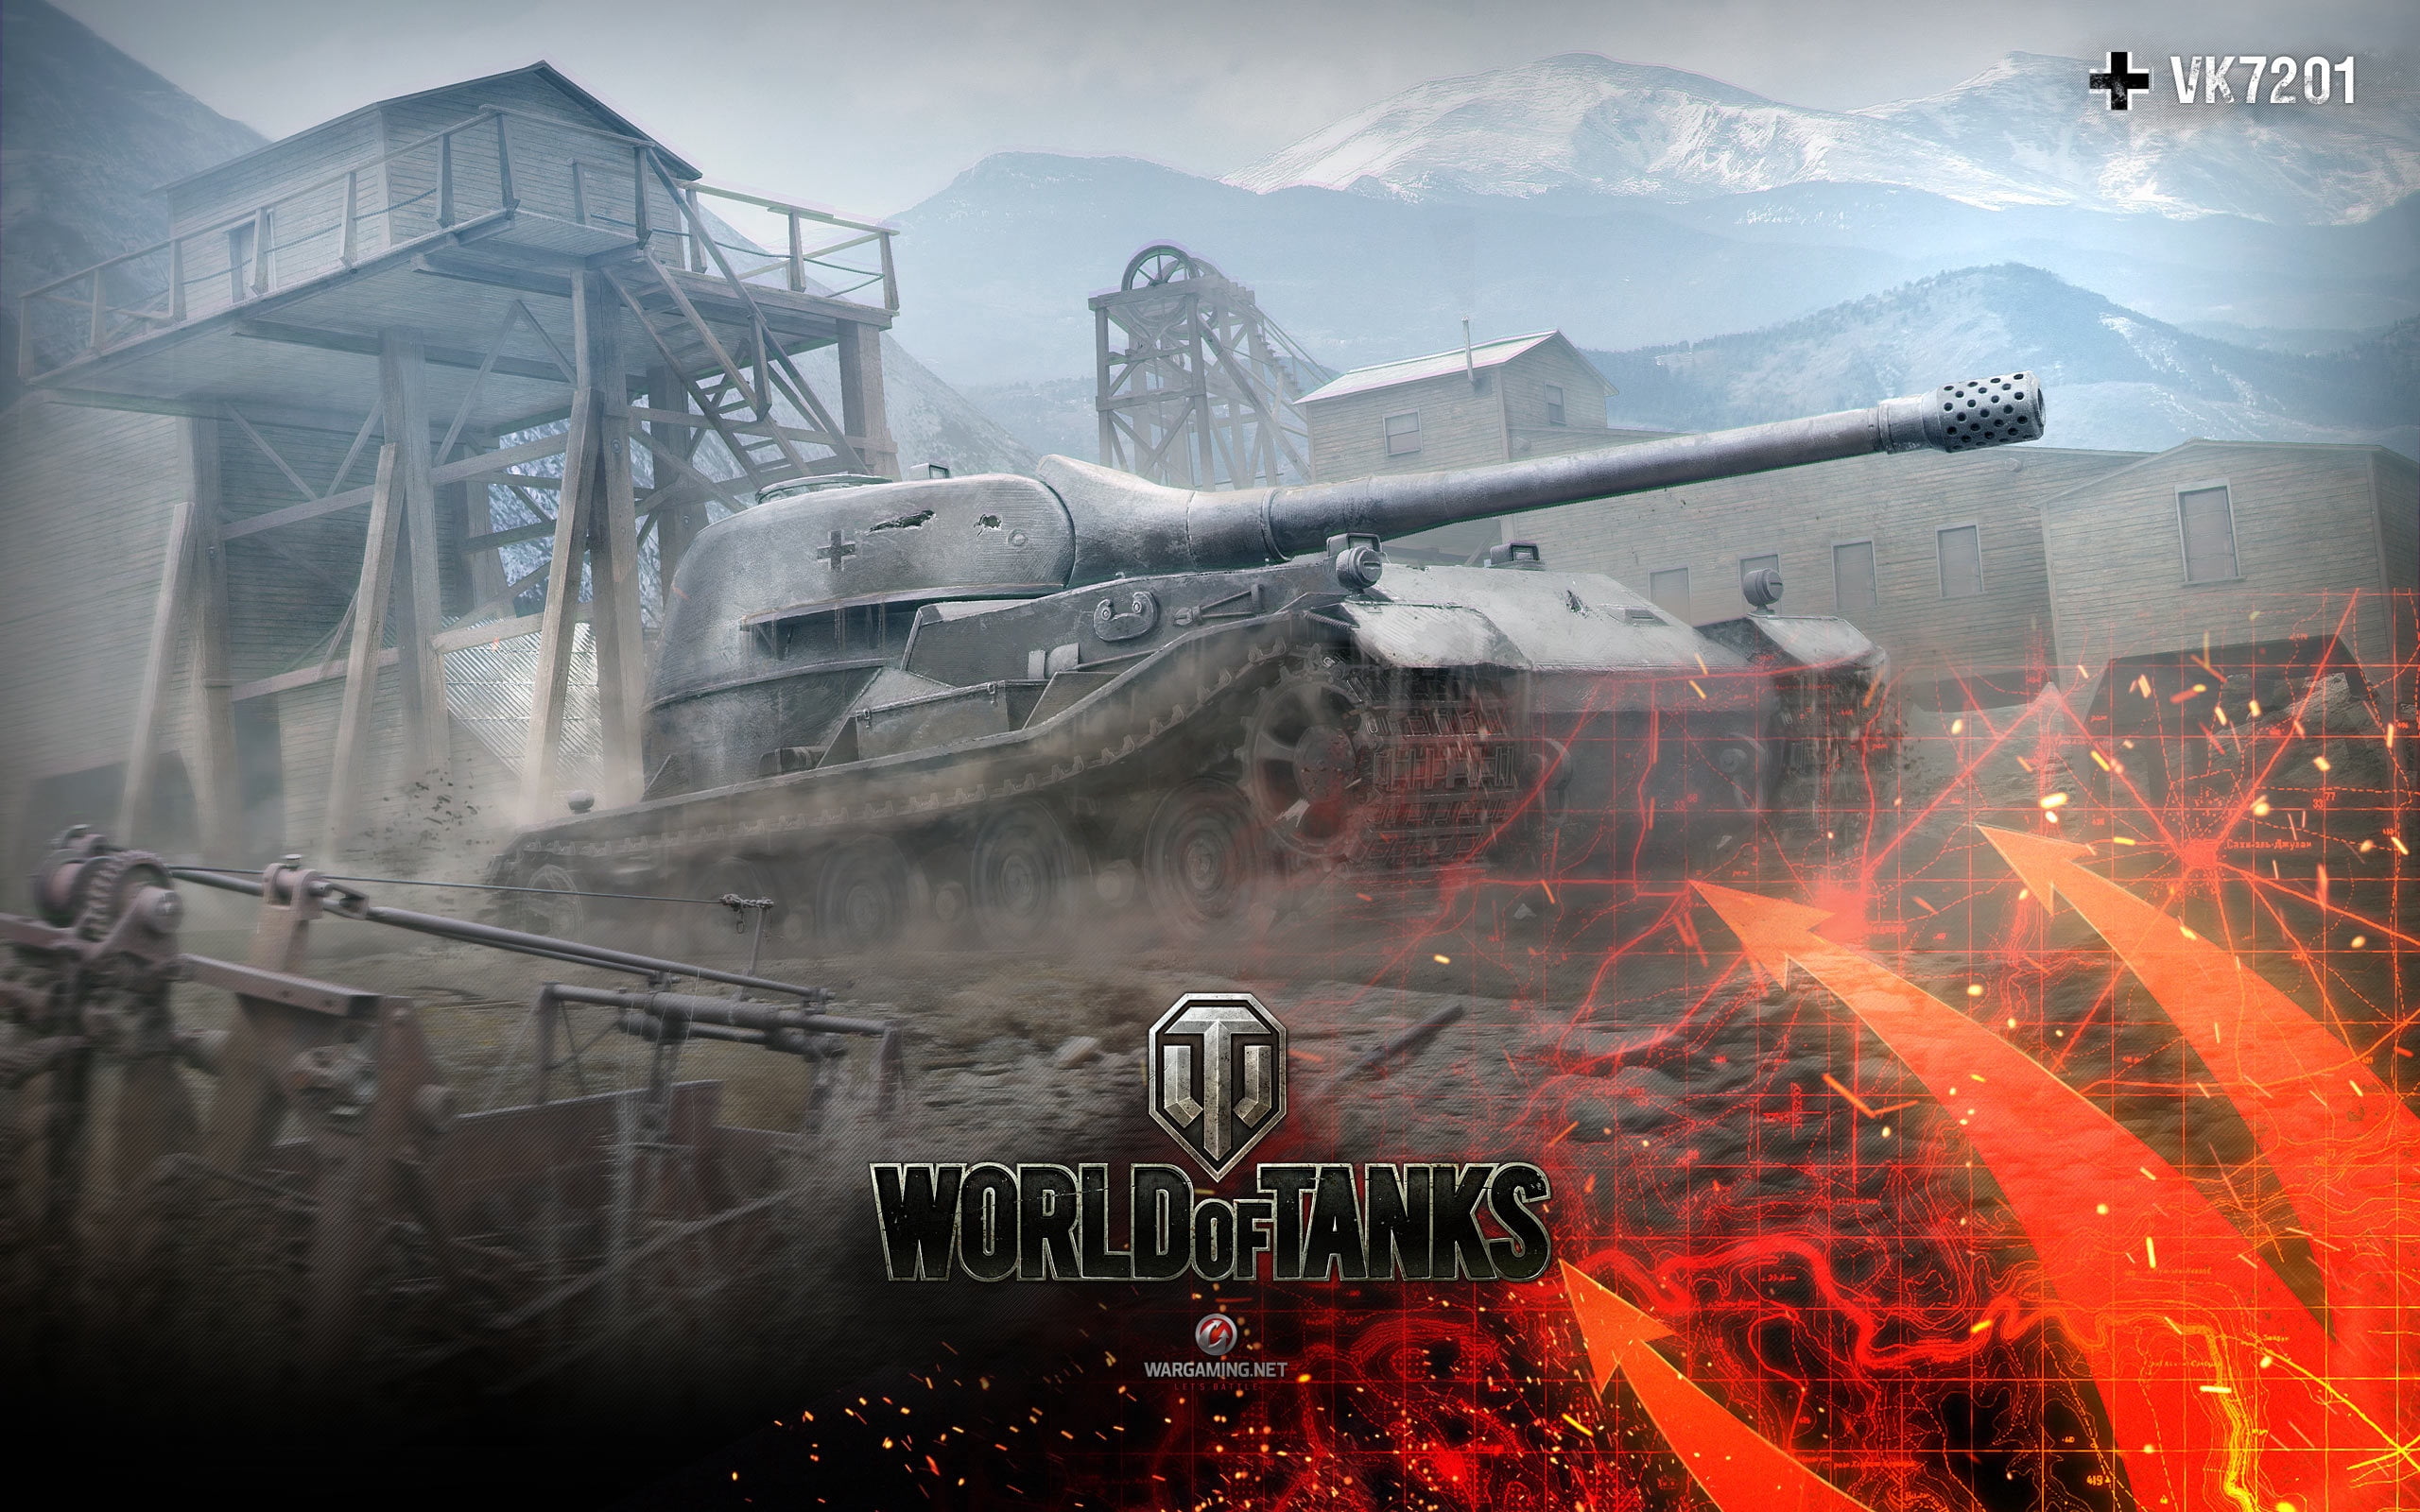 World of Tanks digital wallpaper, wargaming net, wot, the second campaign